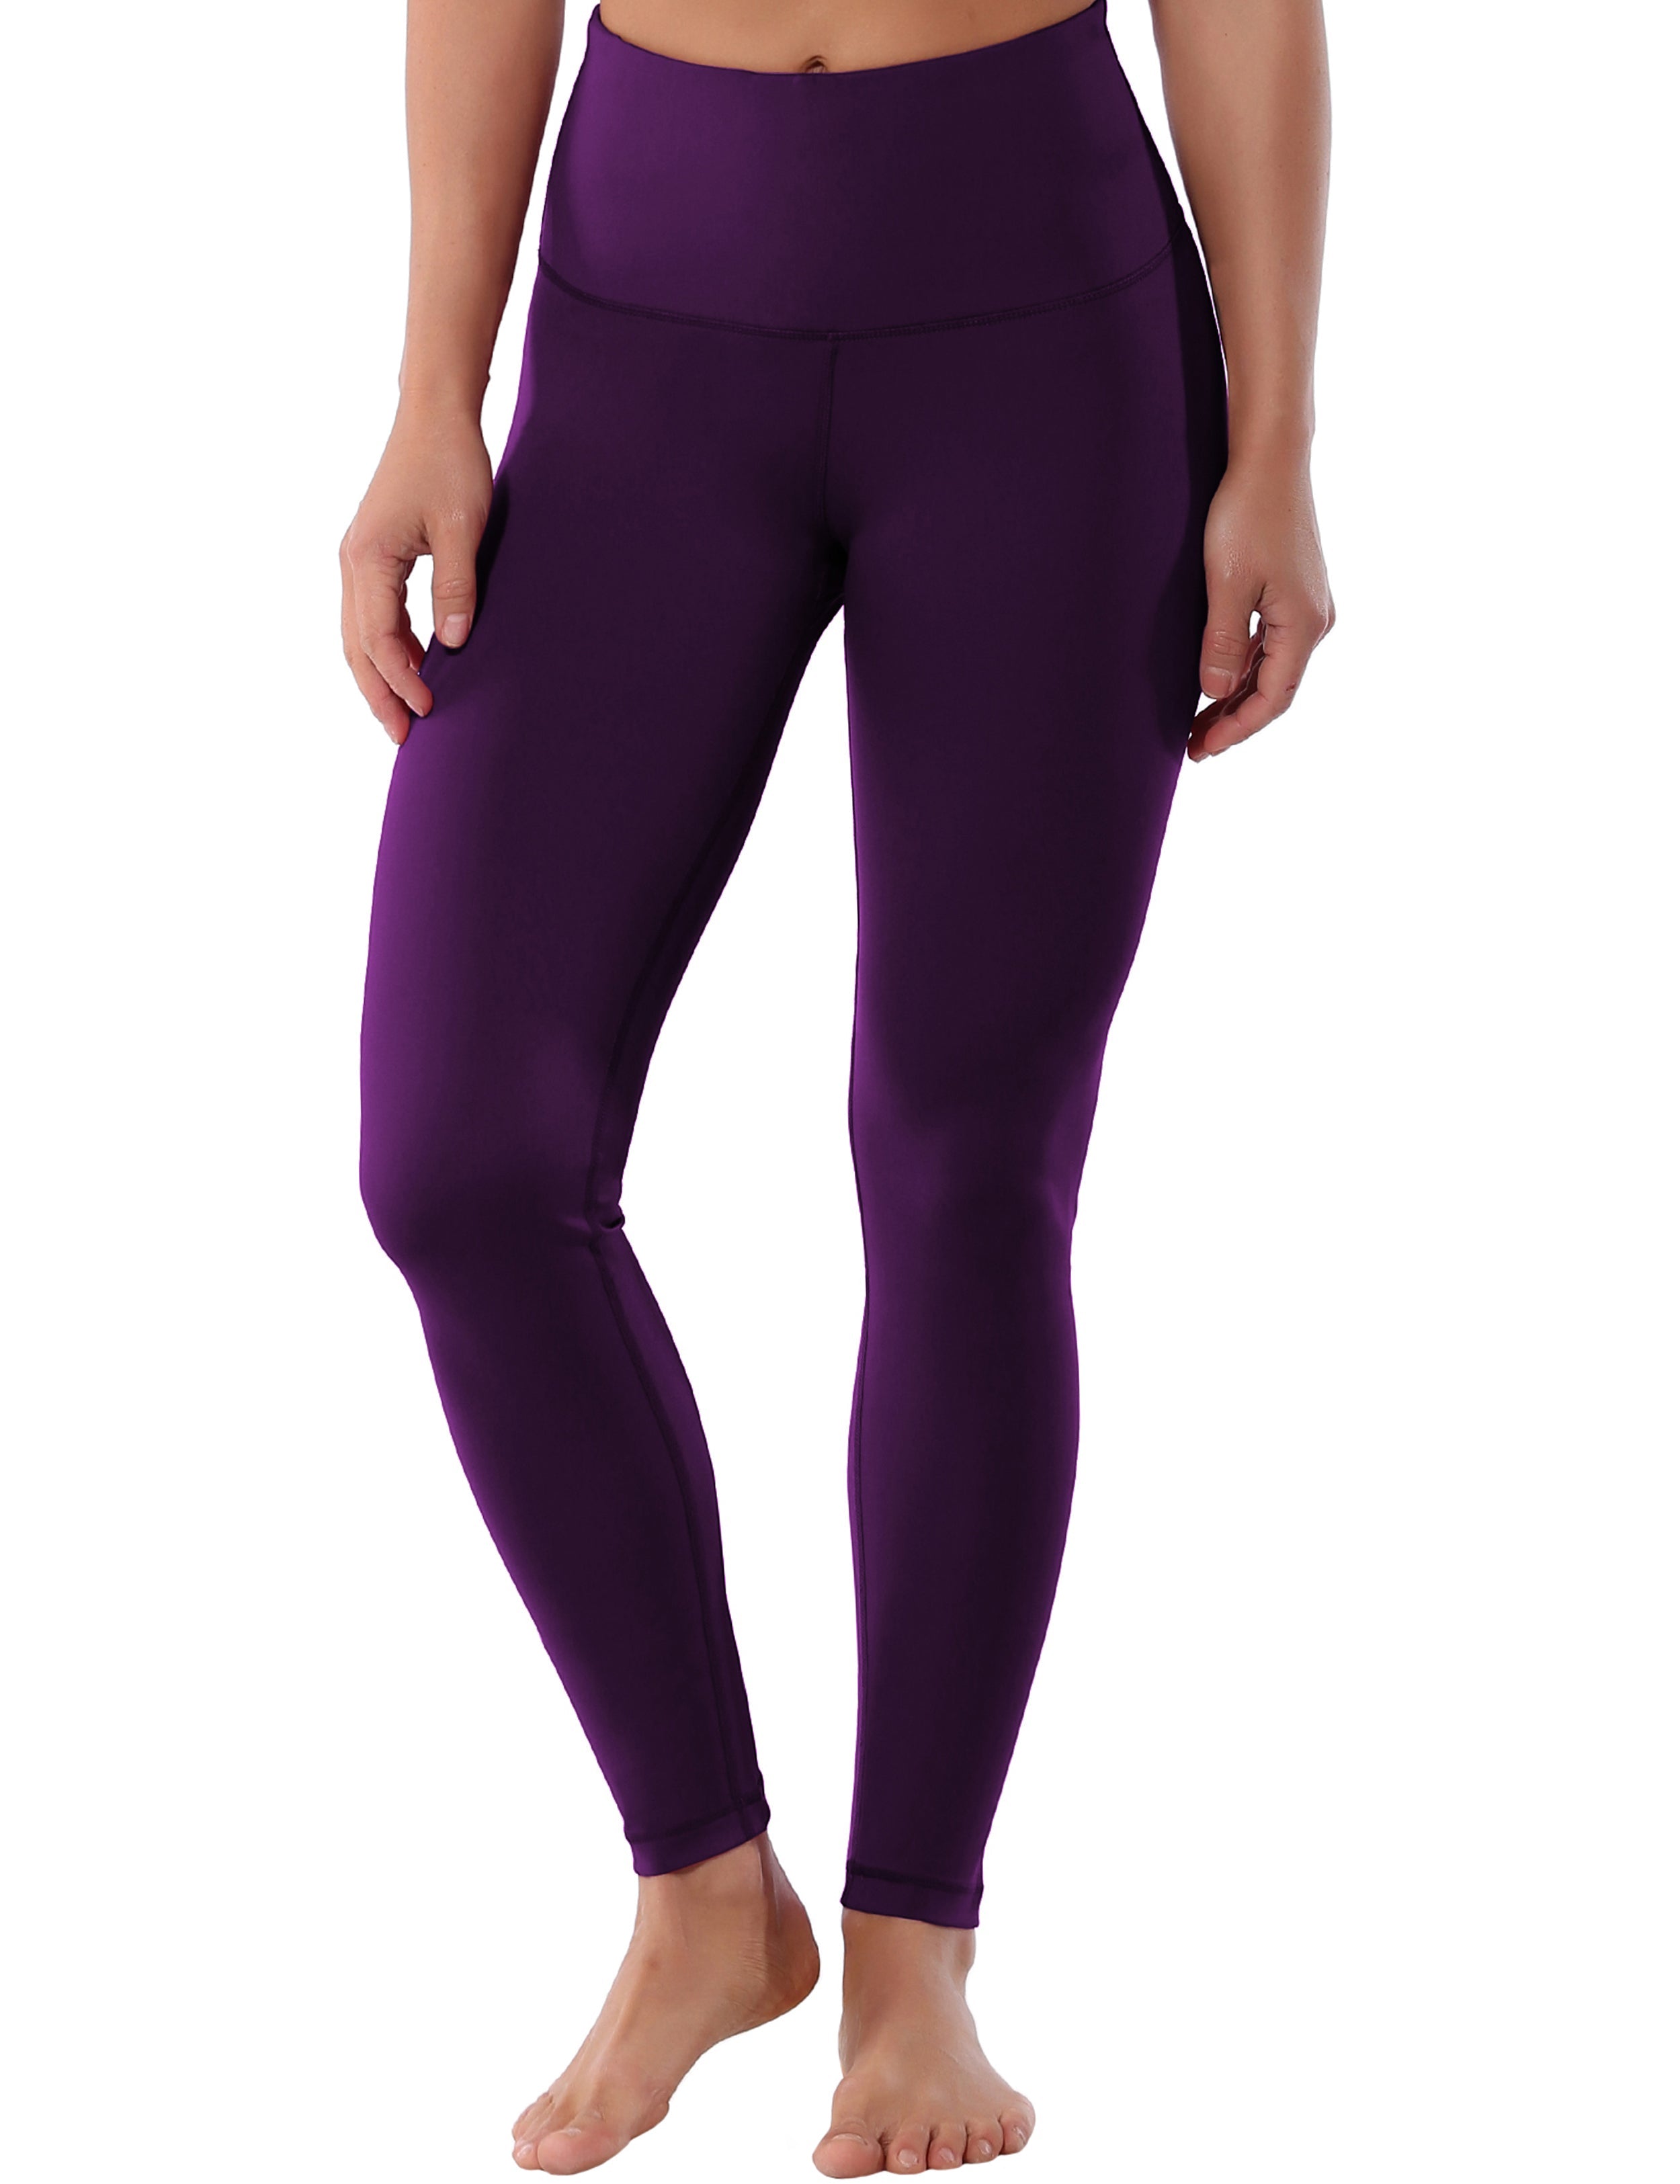 High Waist yogastudio Pants plum 75%Nylon/25%Spandex Fabric doesn't attract lint easily 4-way stretch No see-through Moisture-wicking Tummy control Inner pocket Four lengths